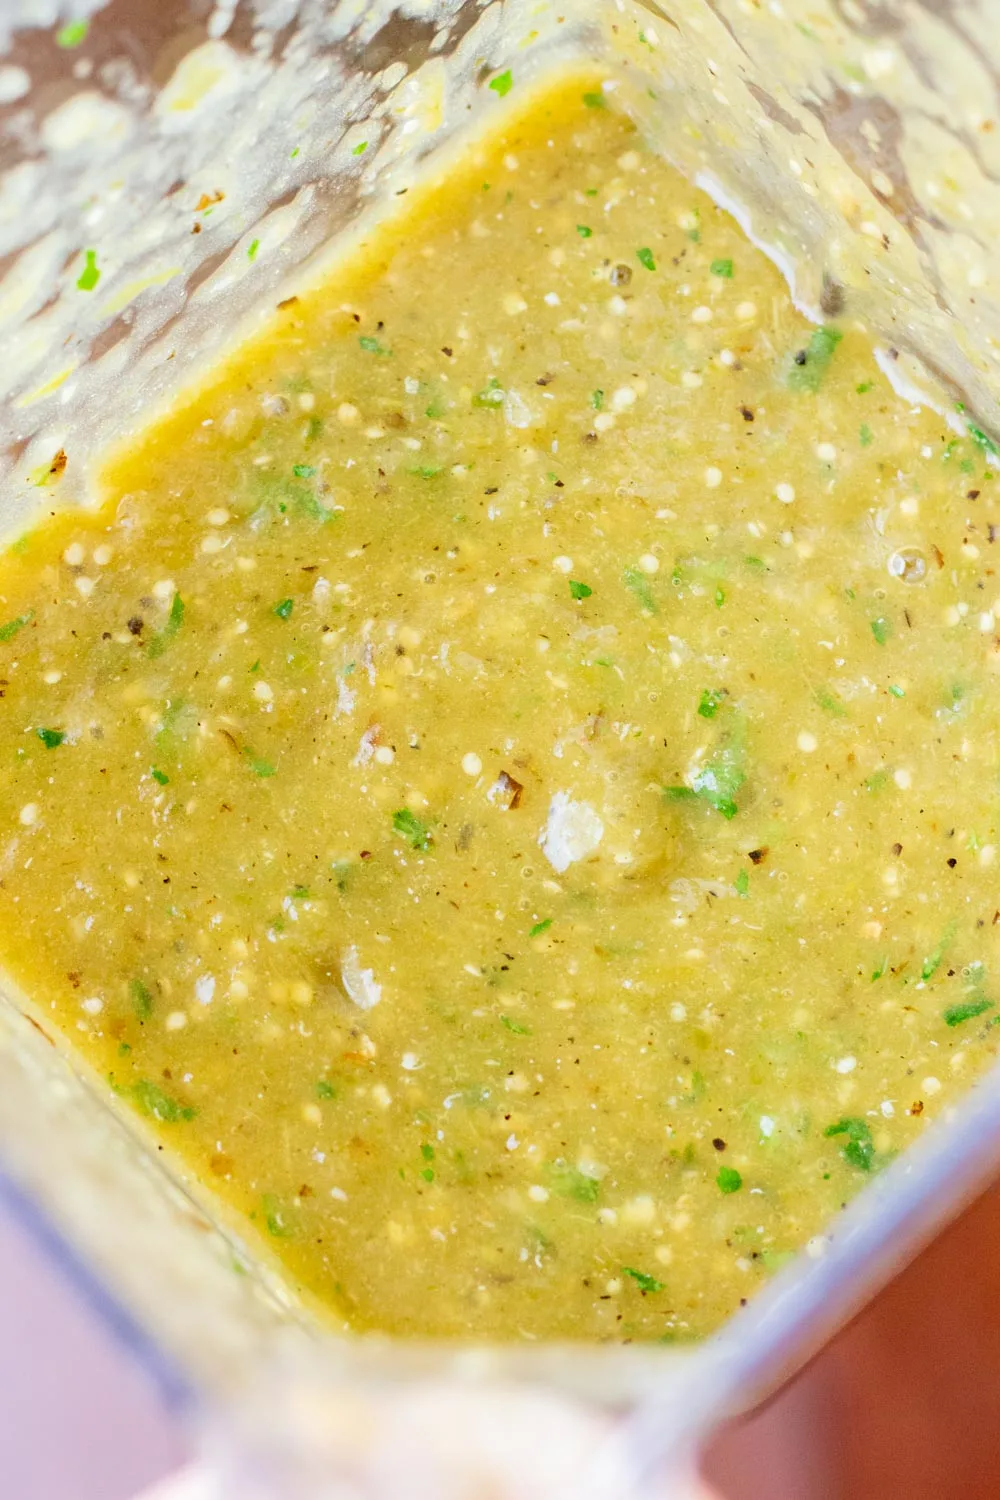 Freshly pureed green enchilada sauce made with tomatillos.